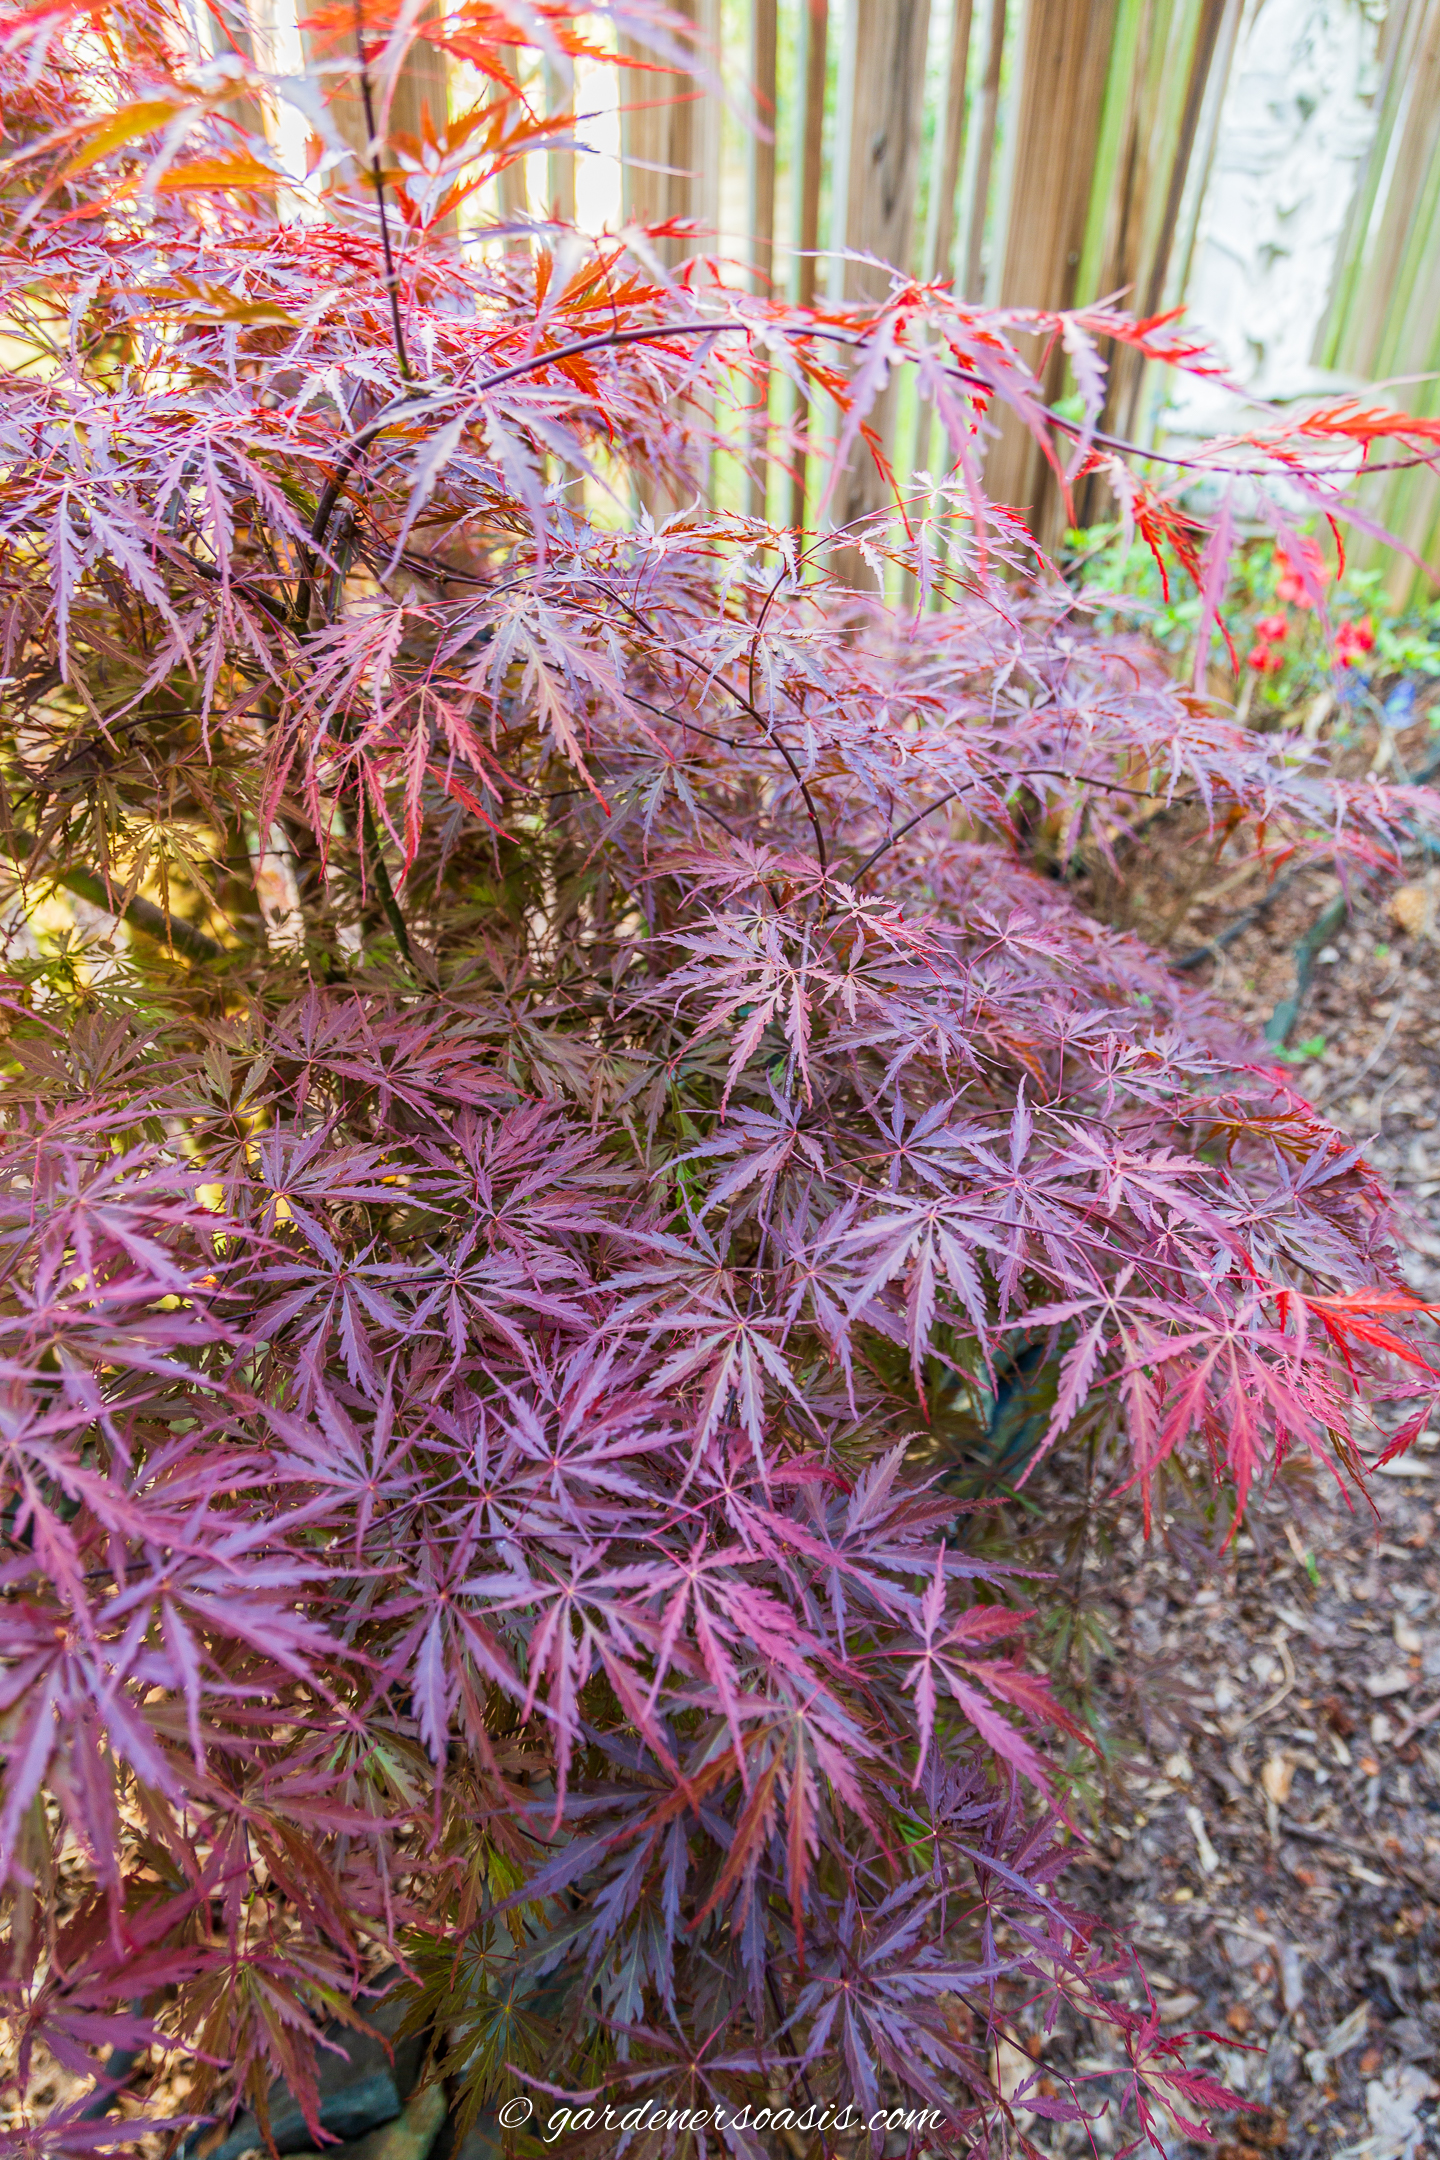 Red-leaved Japanese Maple in the garden